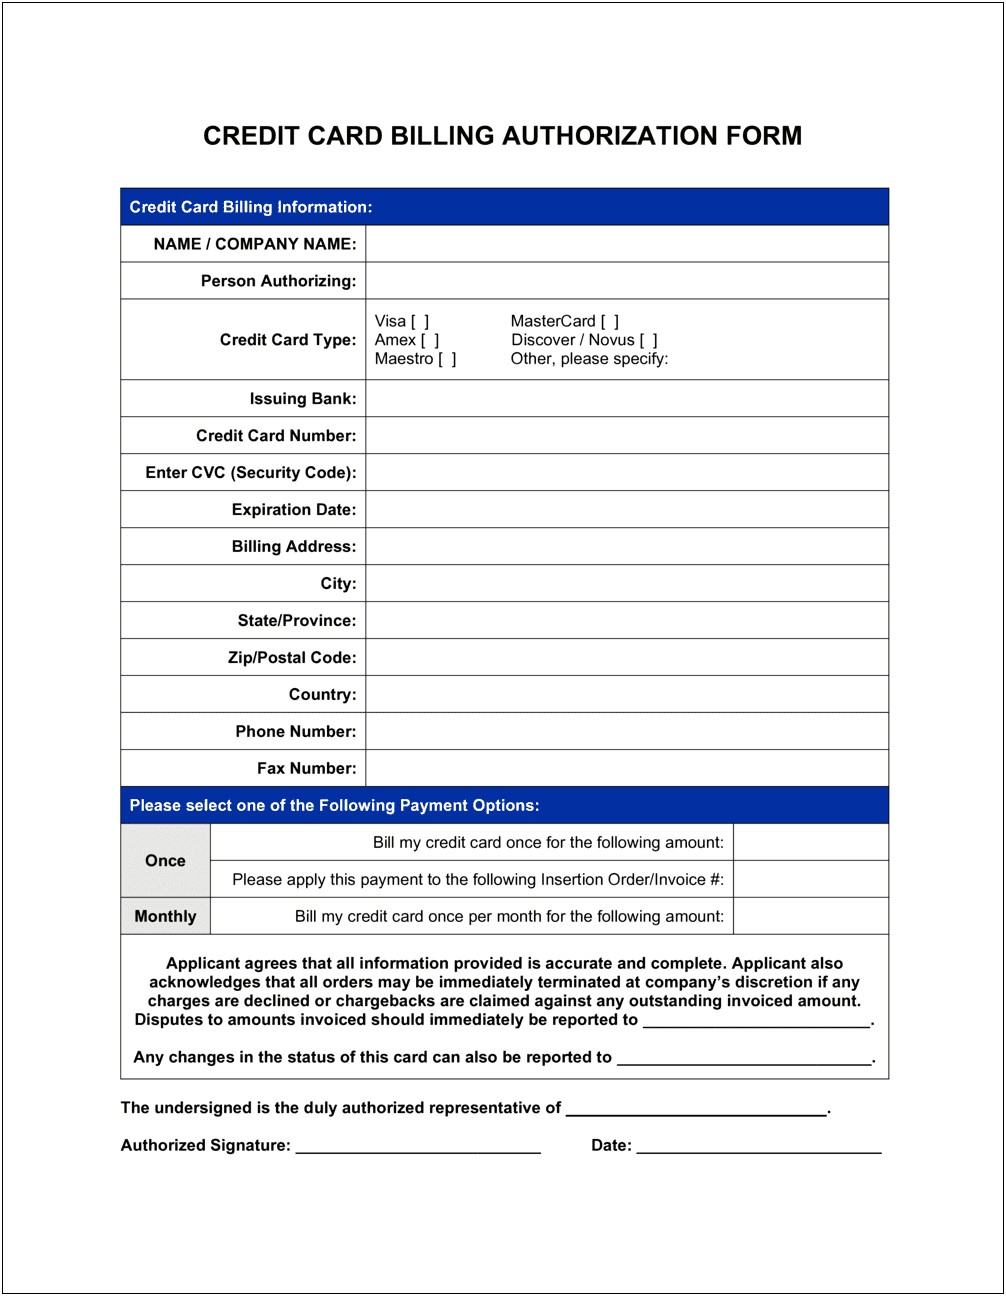 Credit Card Billing Authorization Form Template Free